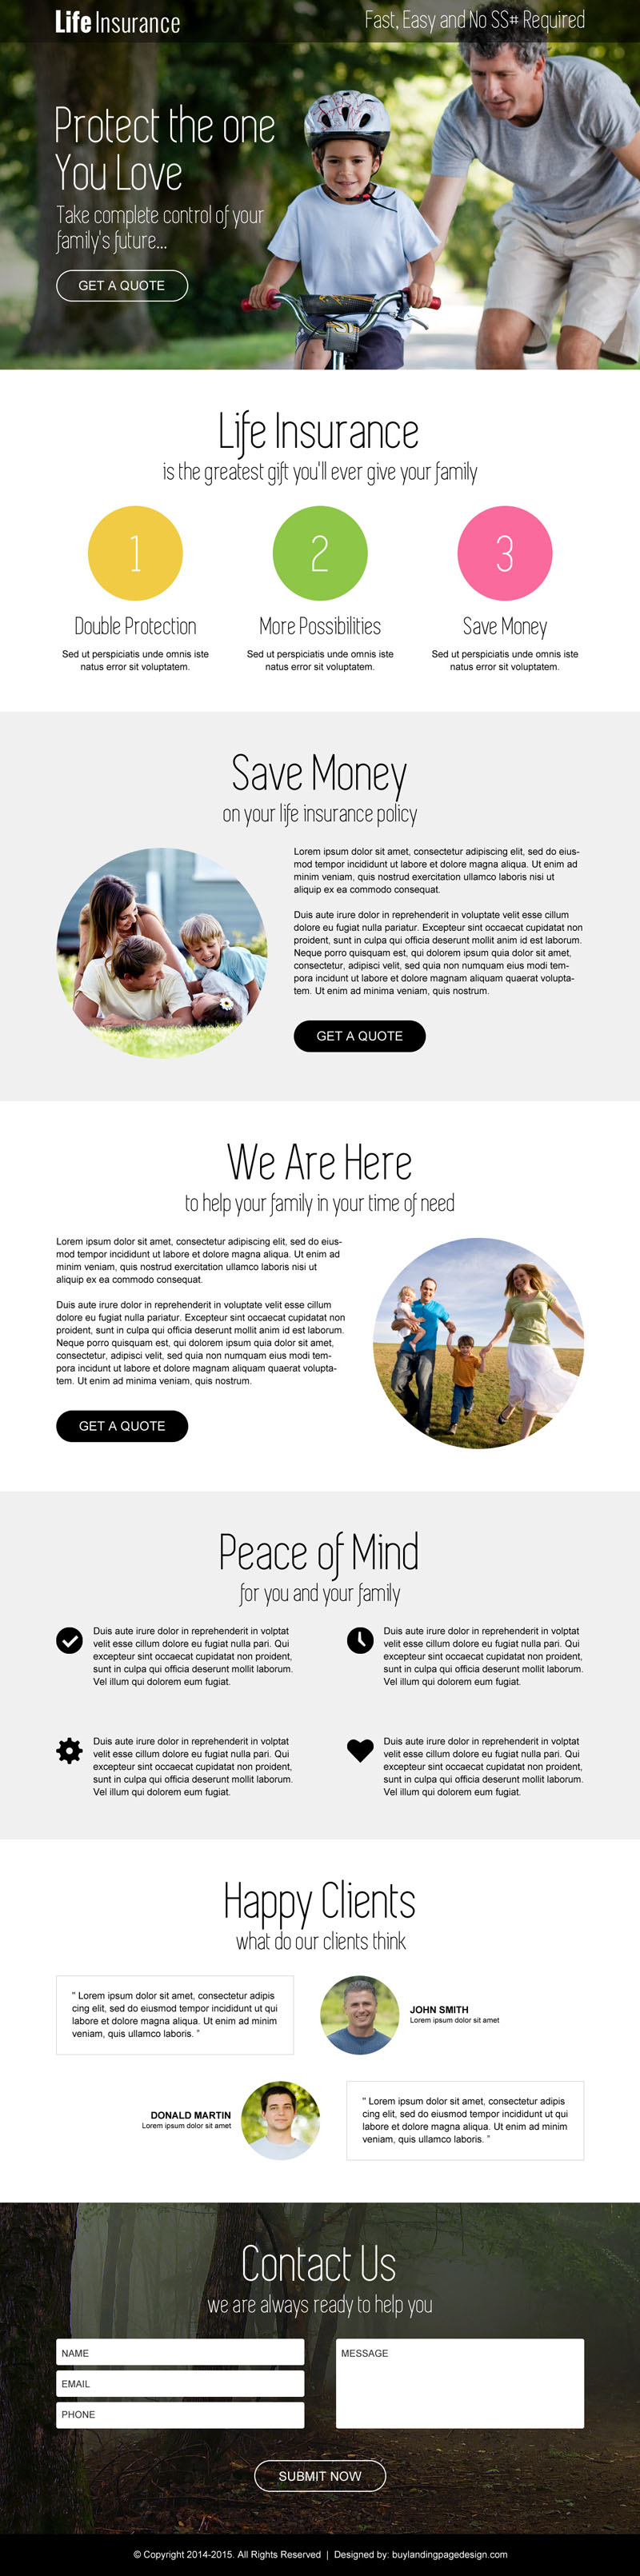 life-insurance-free-quote-service-call-to-action-and-lead-capture-landing-page-design-template-013